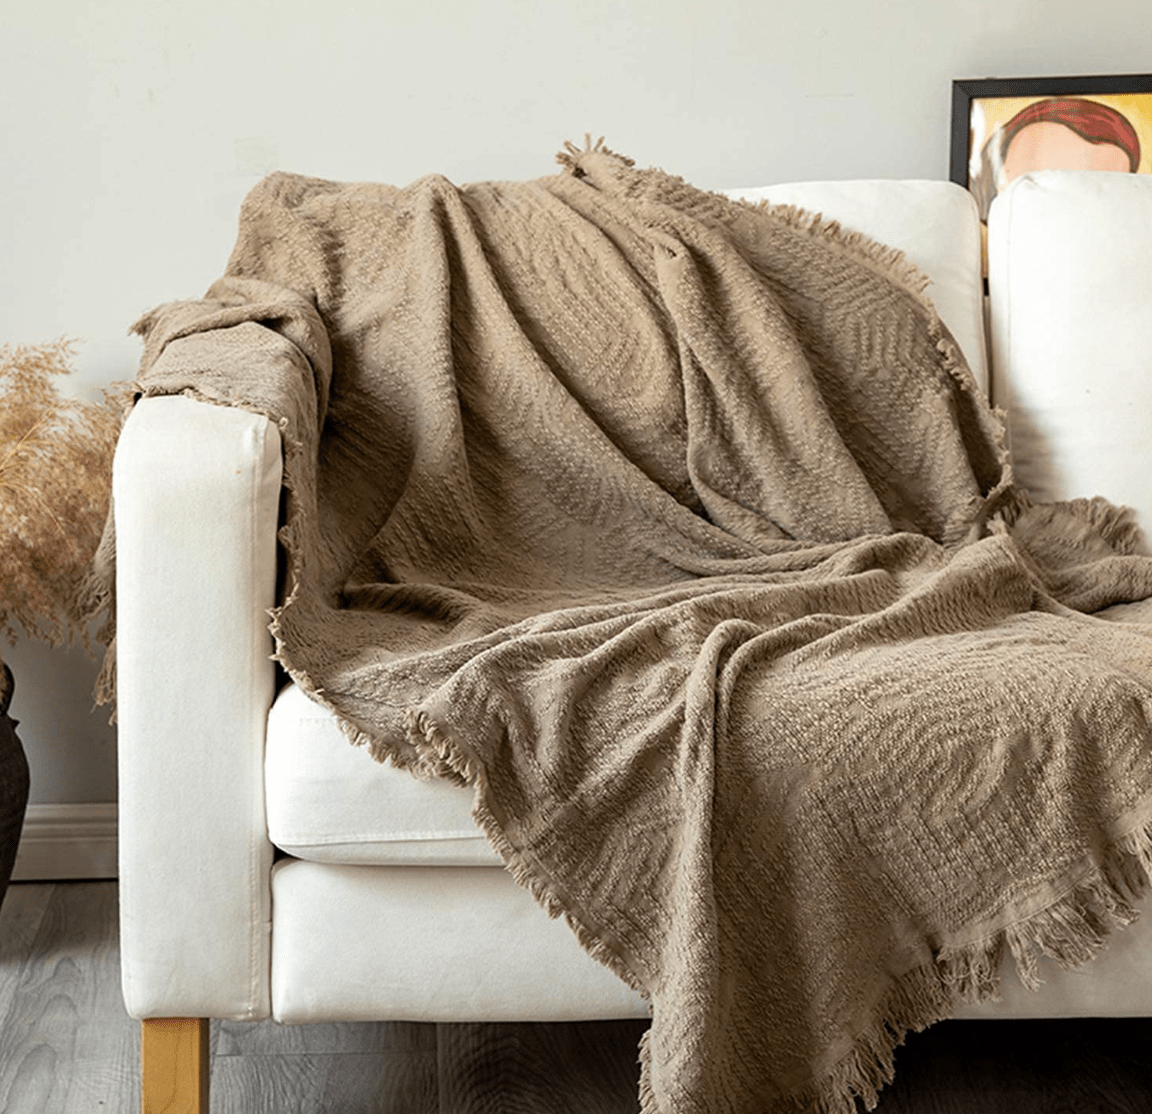 Latte brown Throw Blanket with Fringe